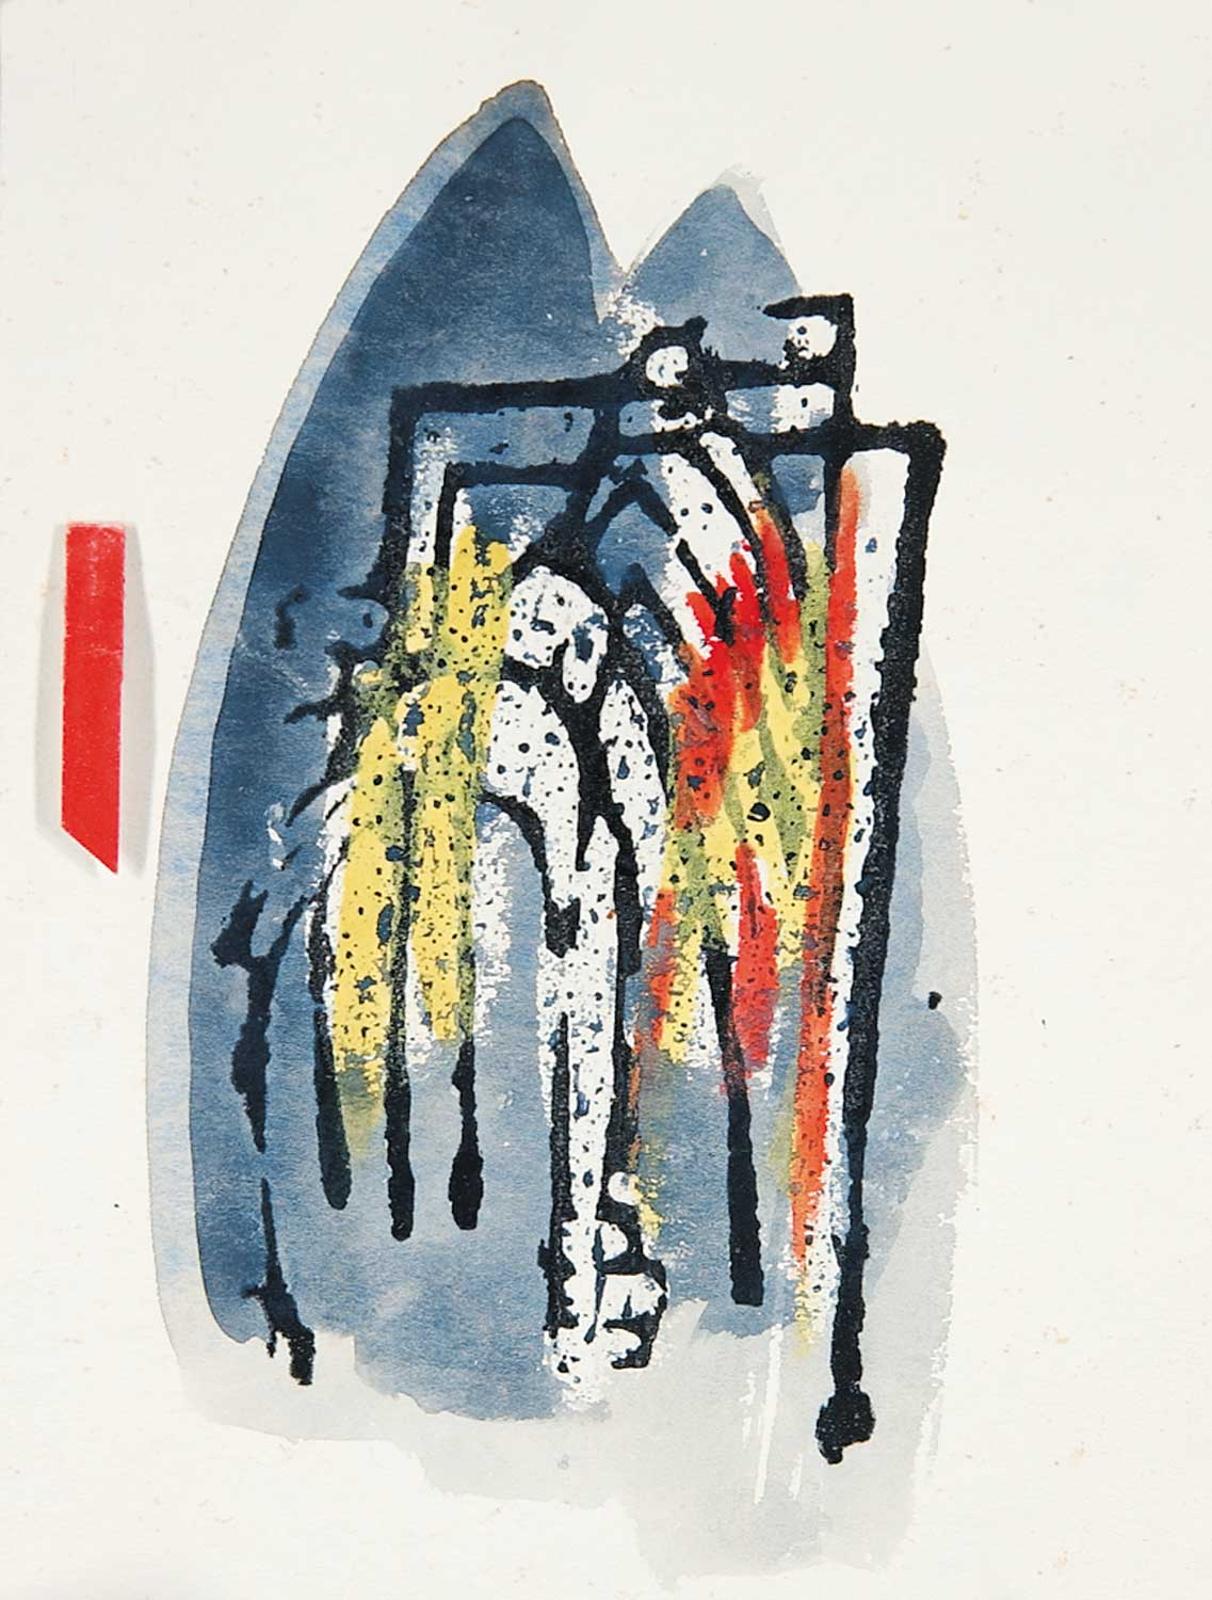 Norman Yates (1923) - Untitled - Abstract